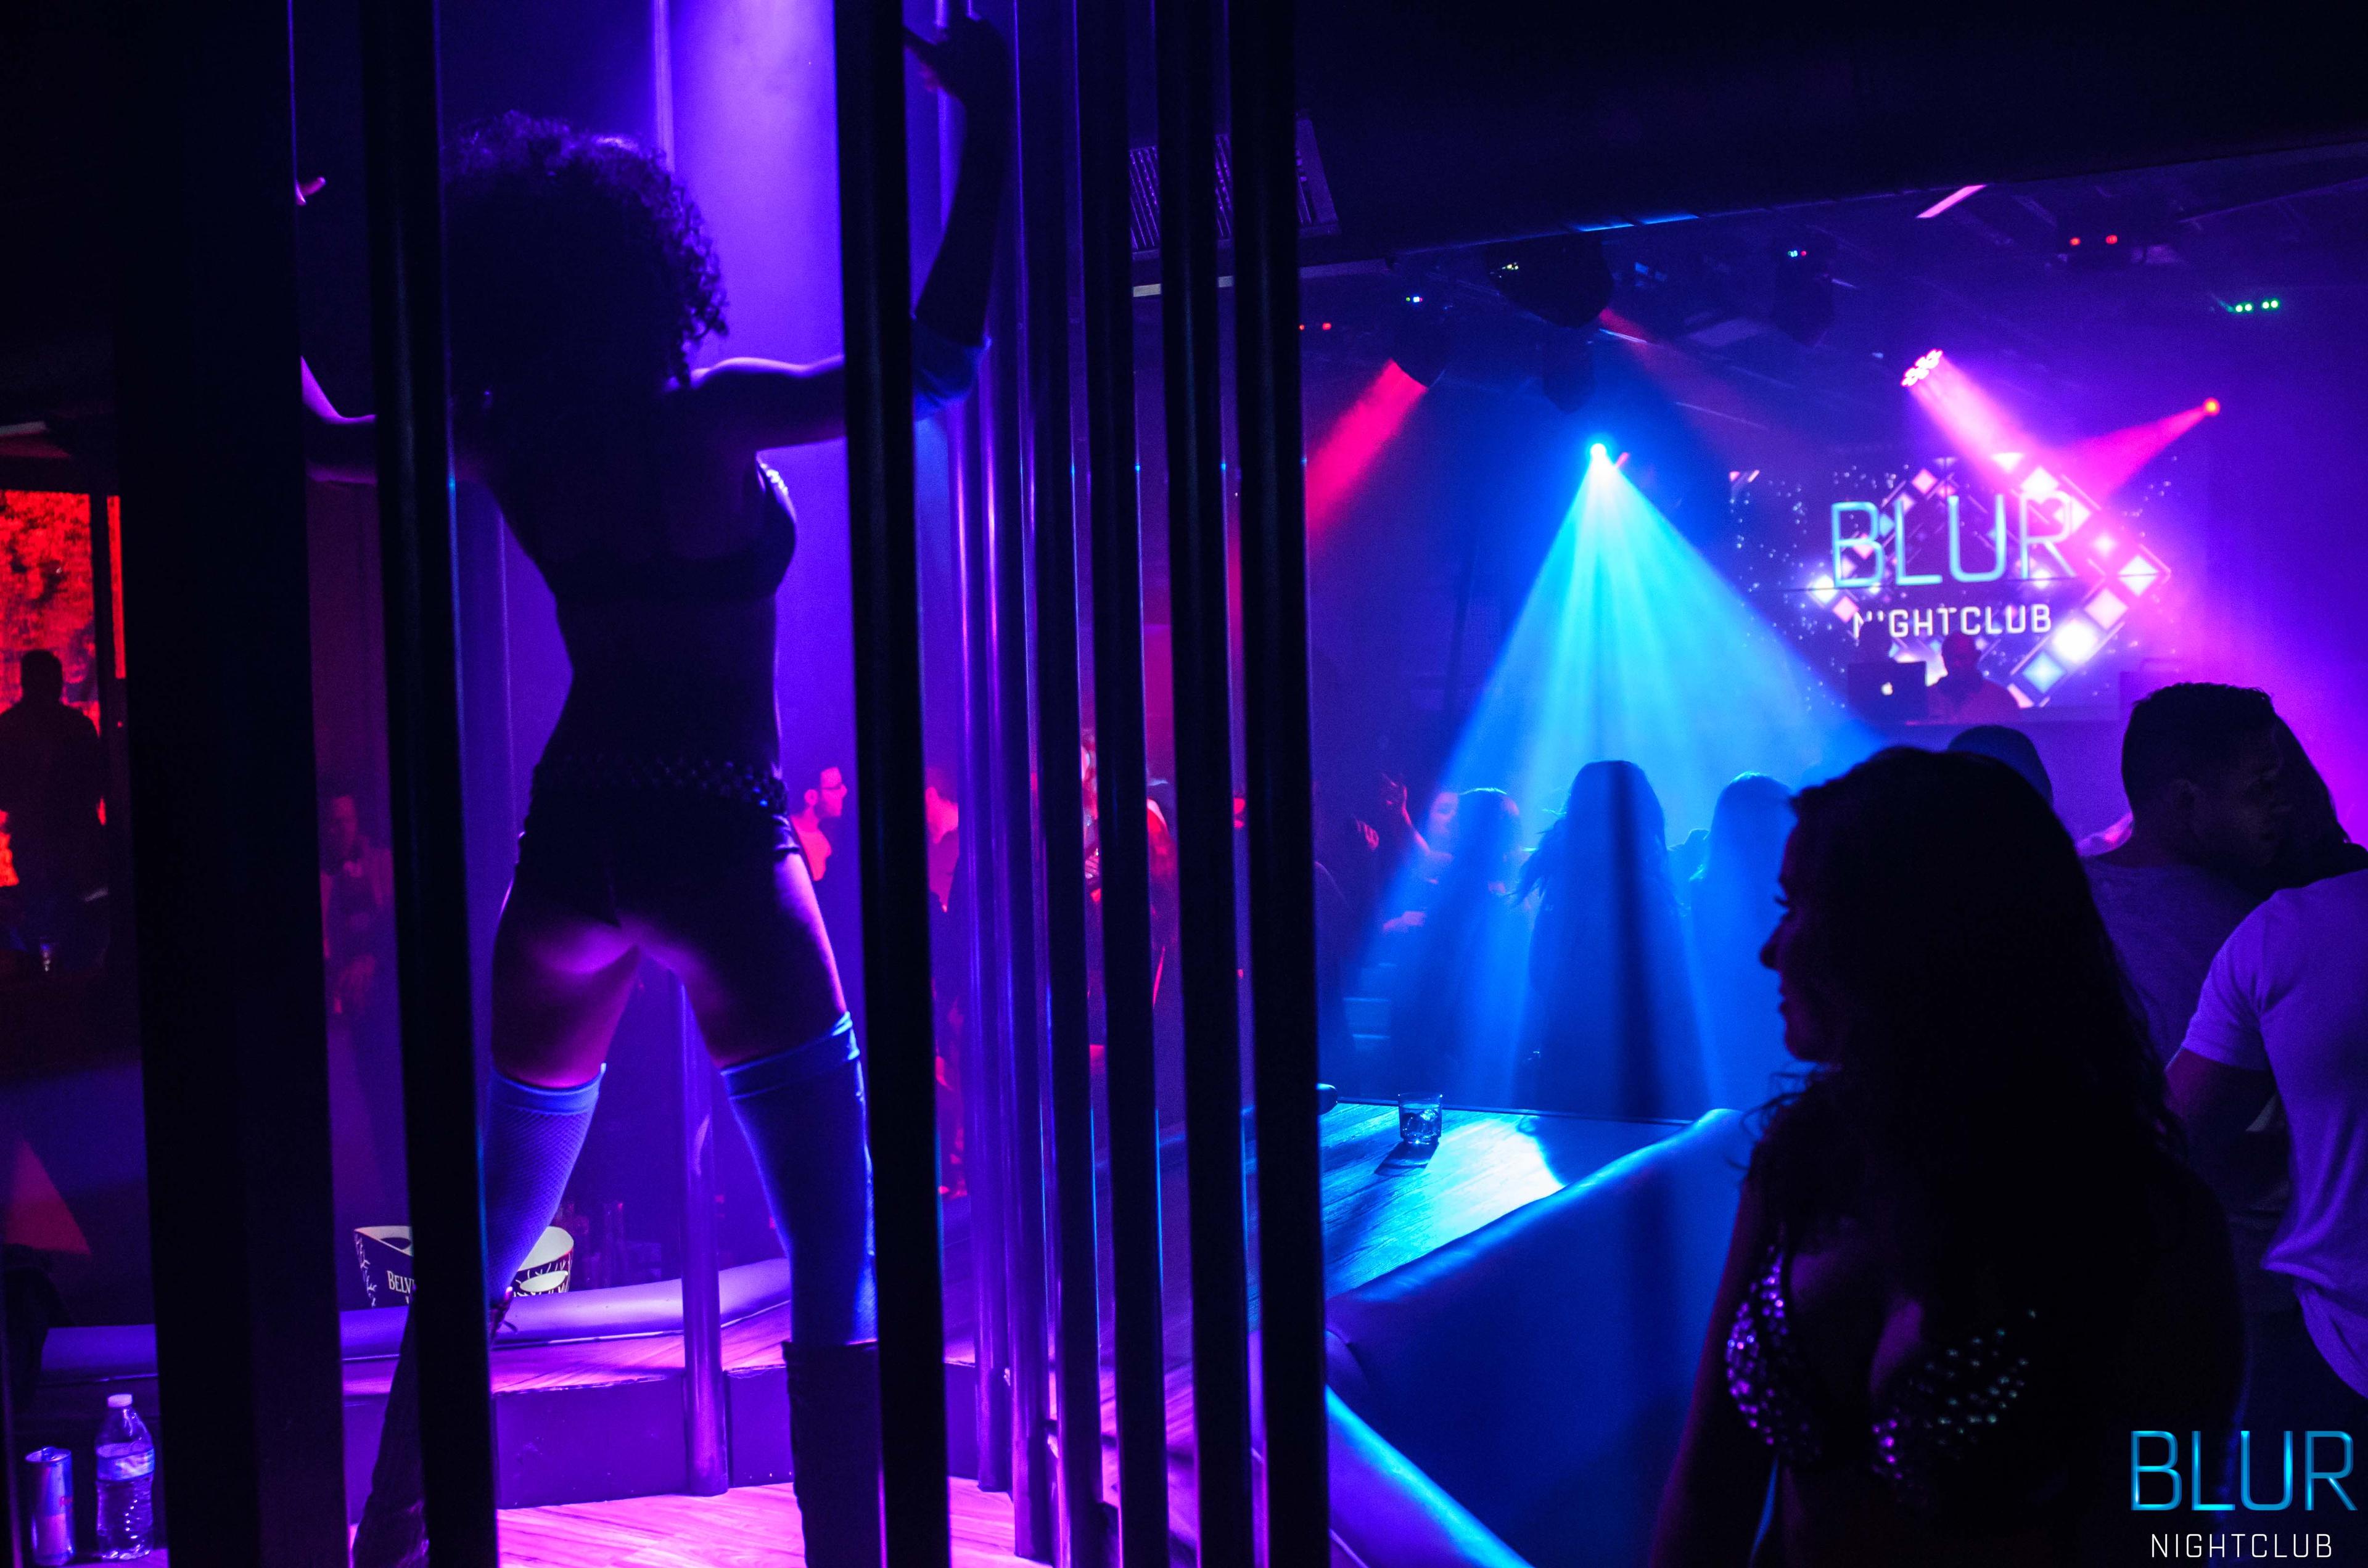 Cover image of this place Blur Nightclub